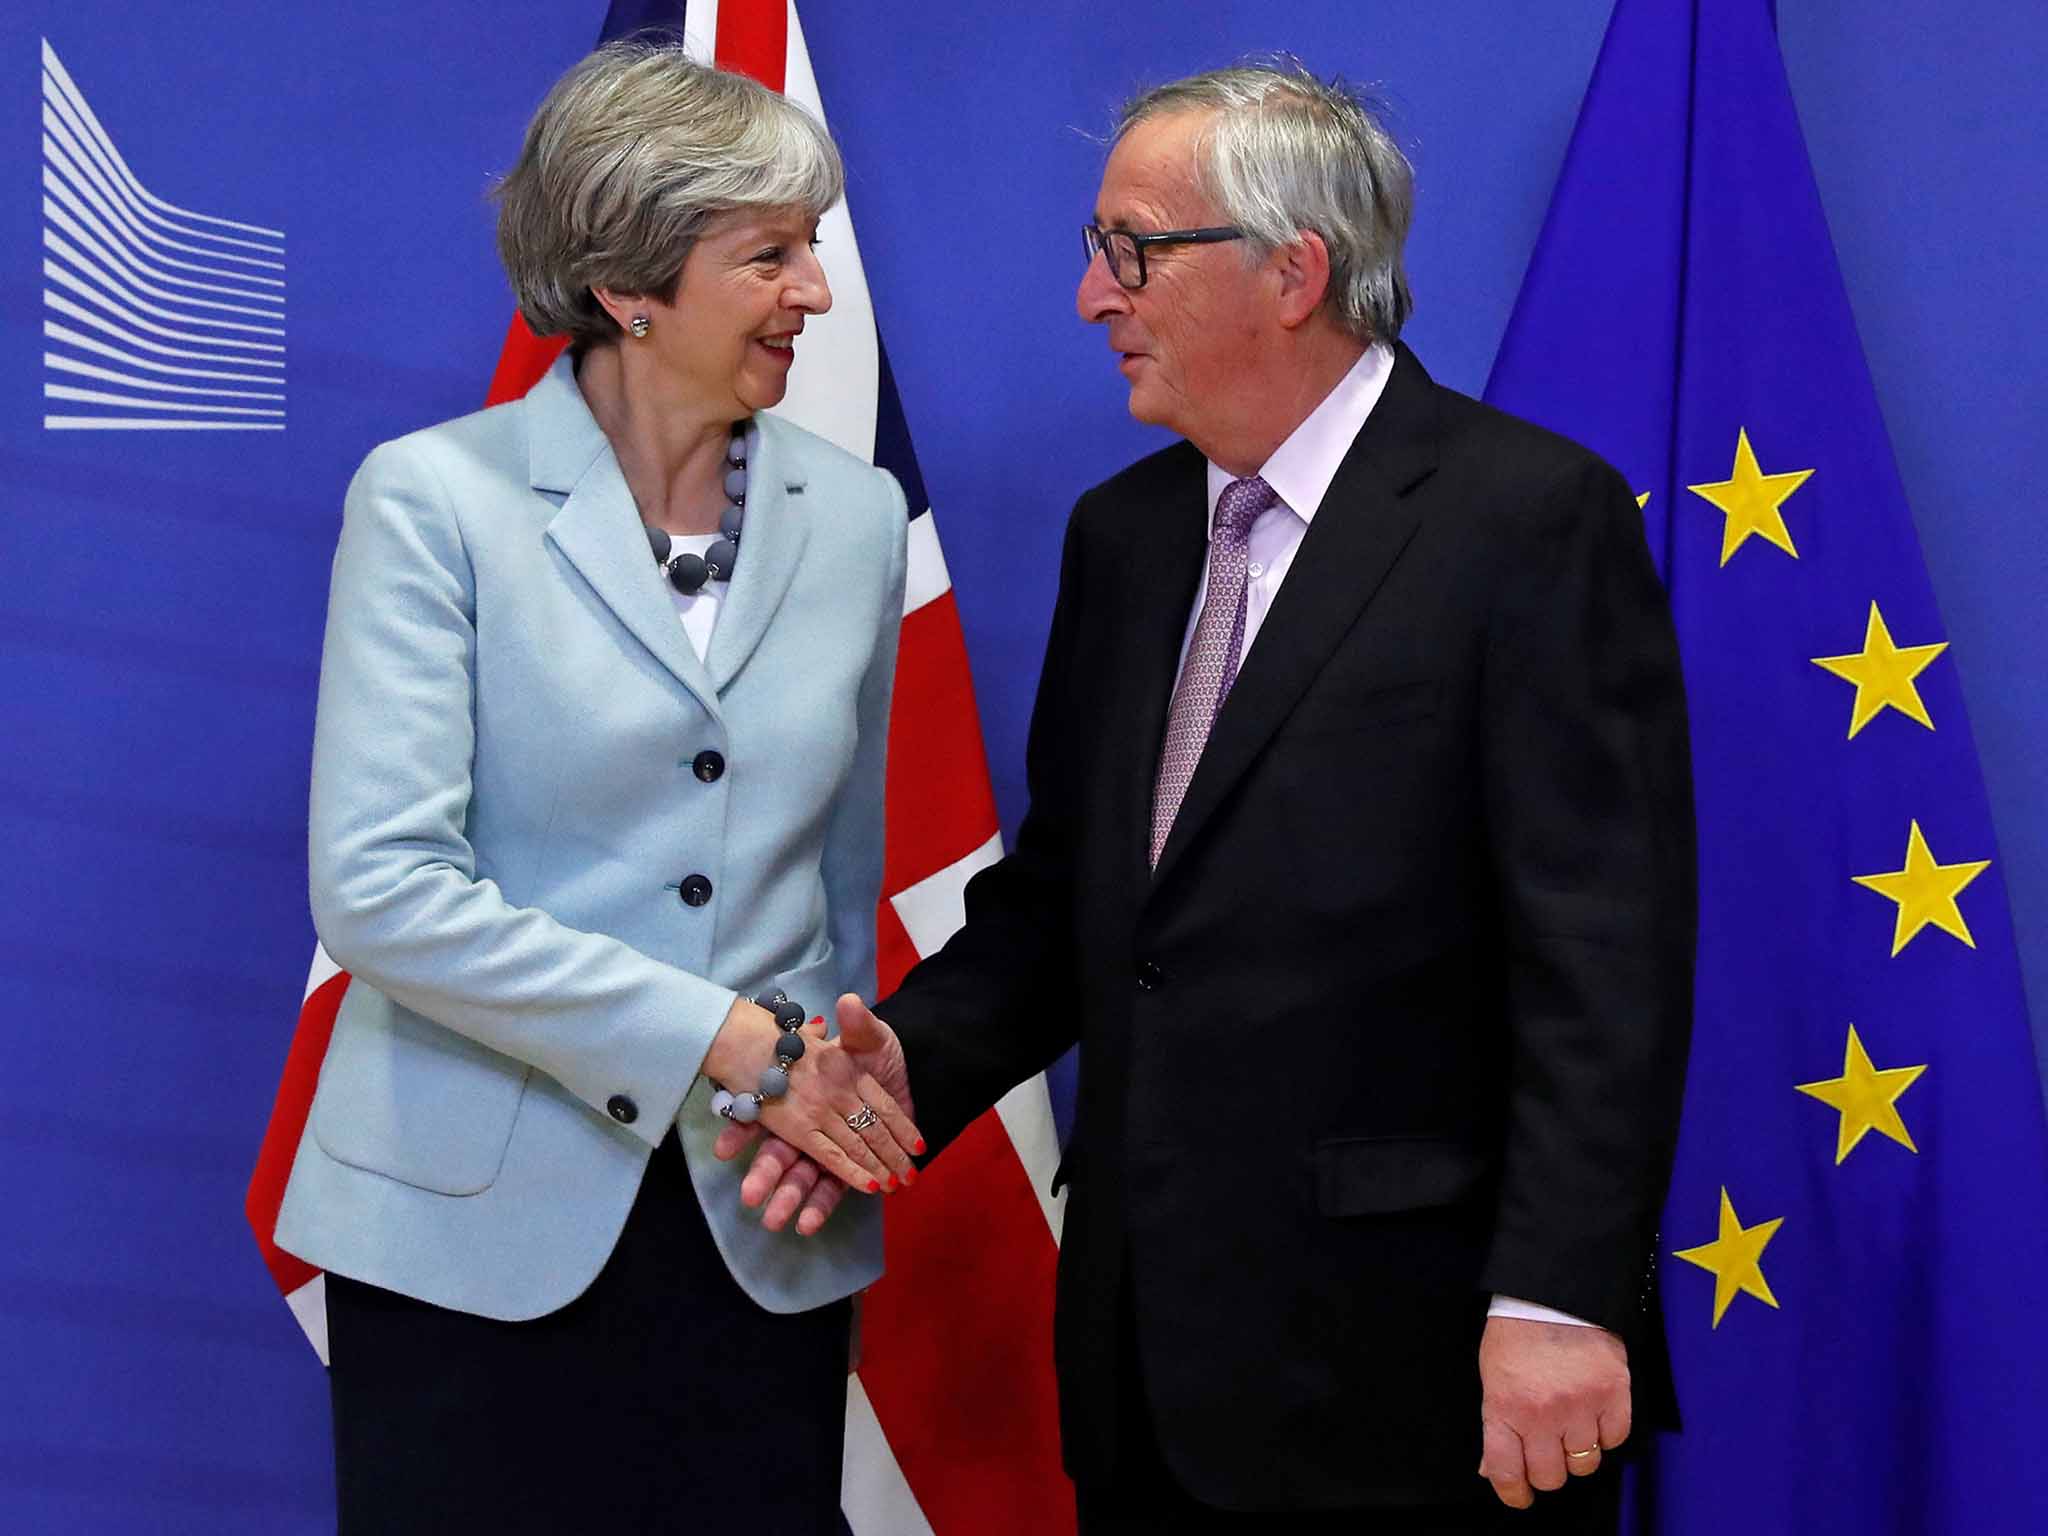 A Brexit deal has been struck by Theresa May and Jean-Claude Juncker